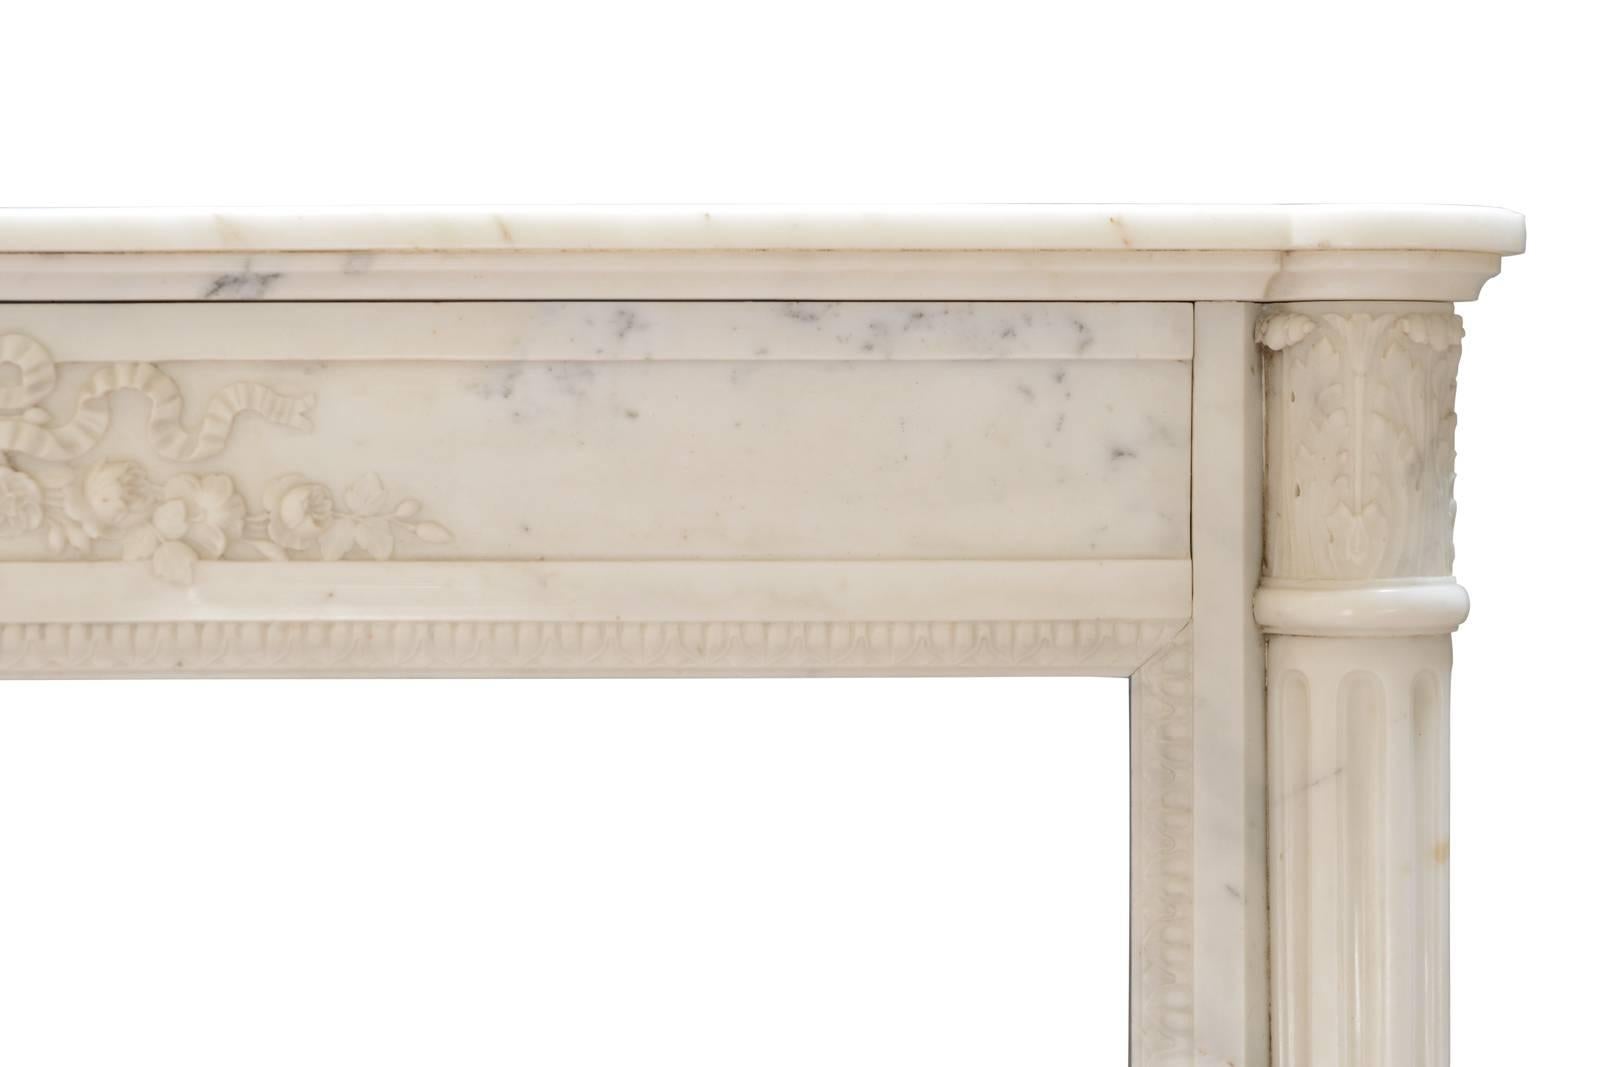 Louis XVI Style White Carrara Marble Fireplace, 19th Century For Sale 1